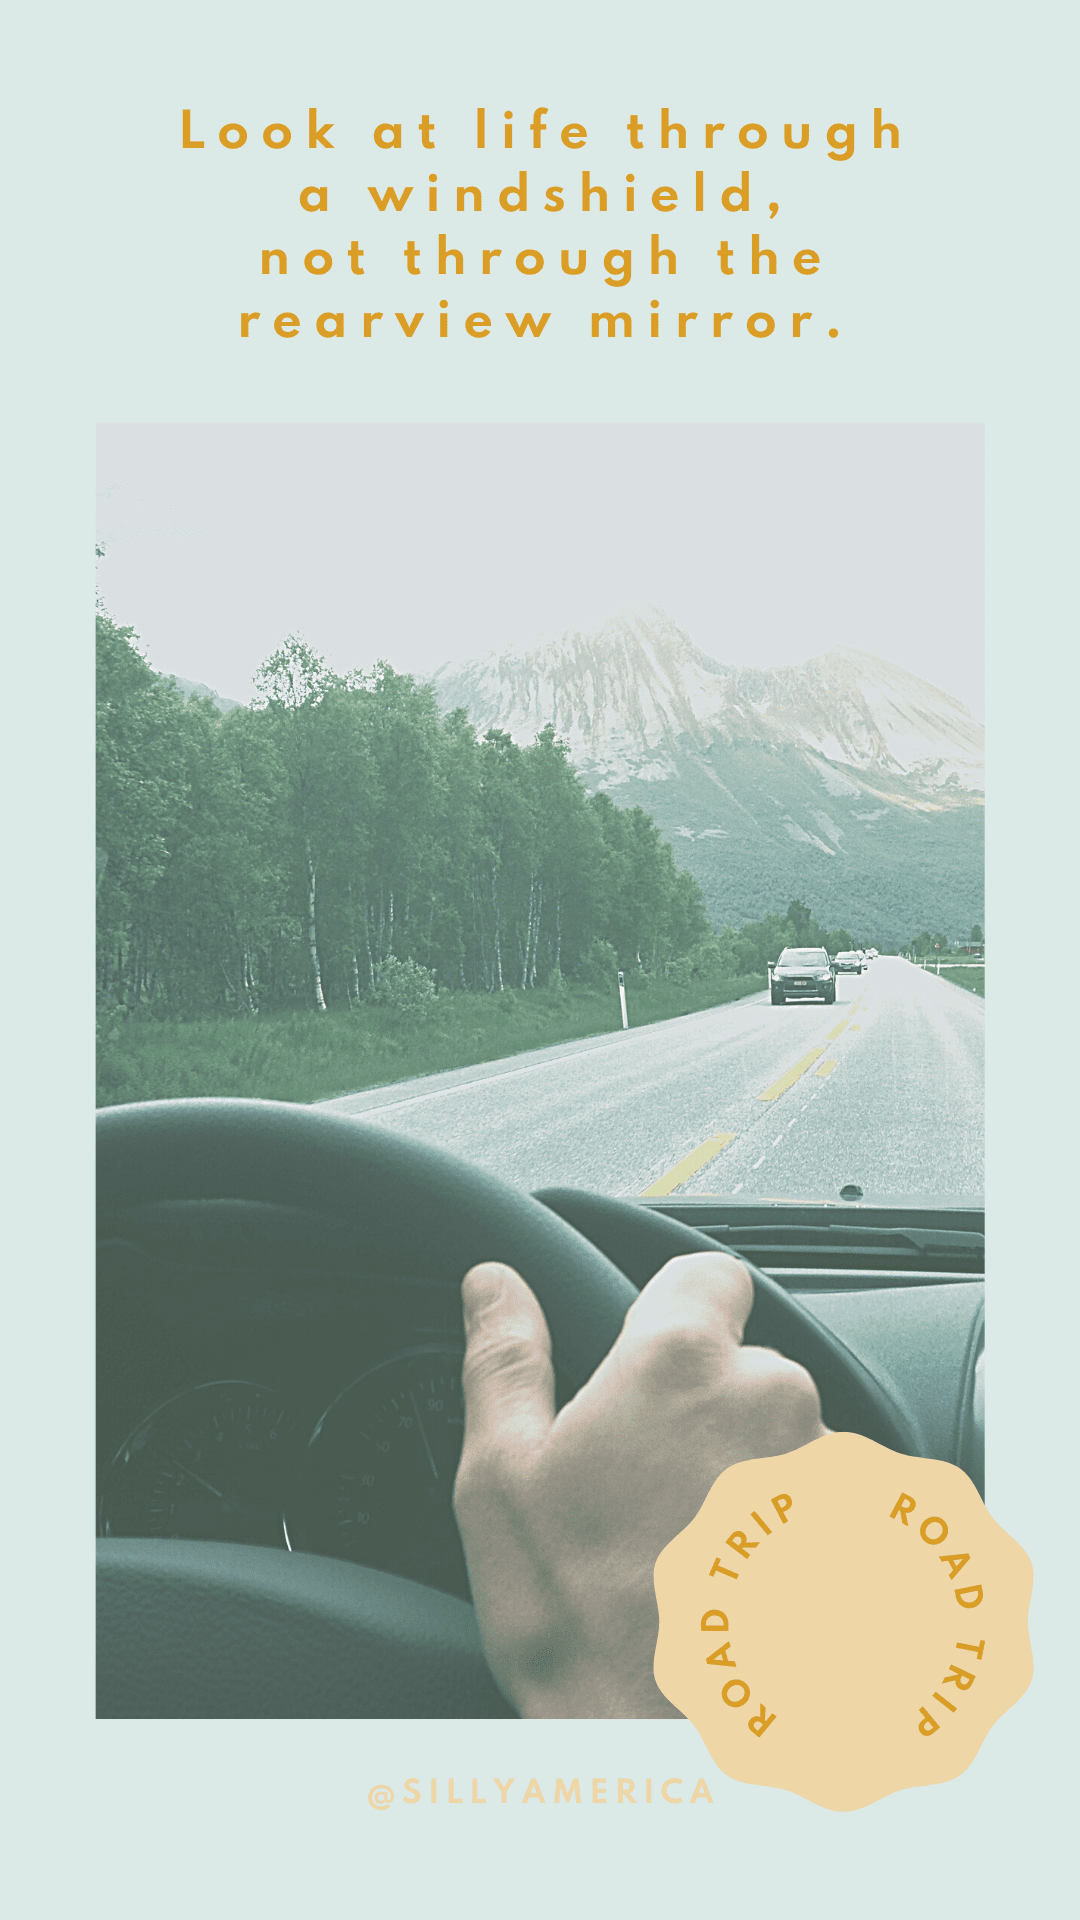 Look at life through a windshield, not through the rearview mirror. - Road Trip Captions for Instagram